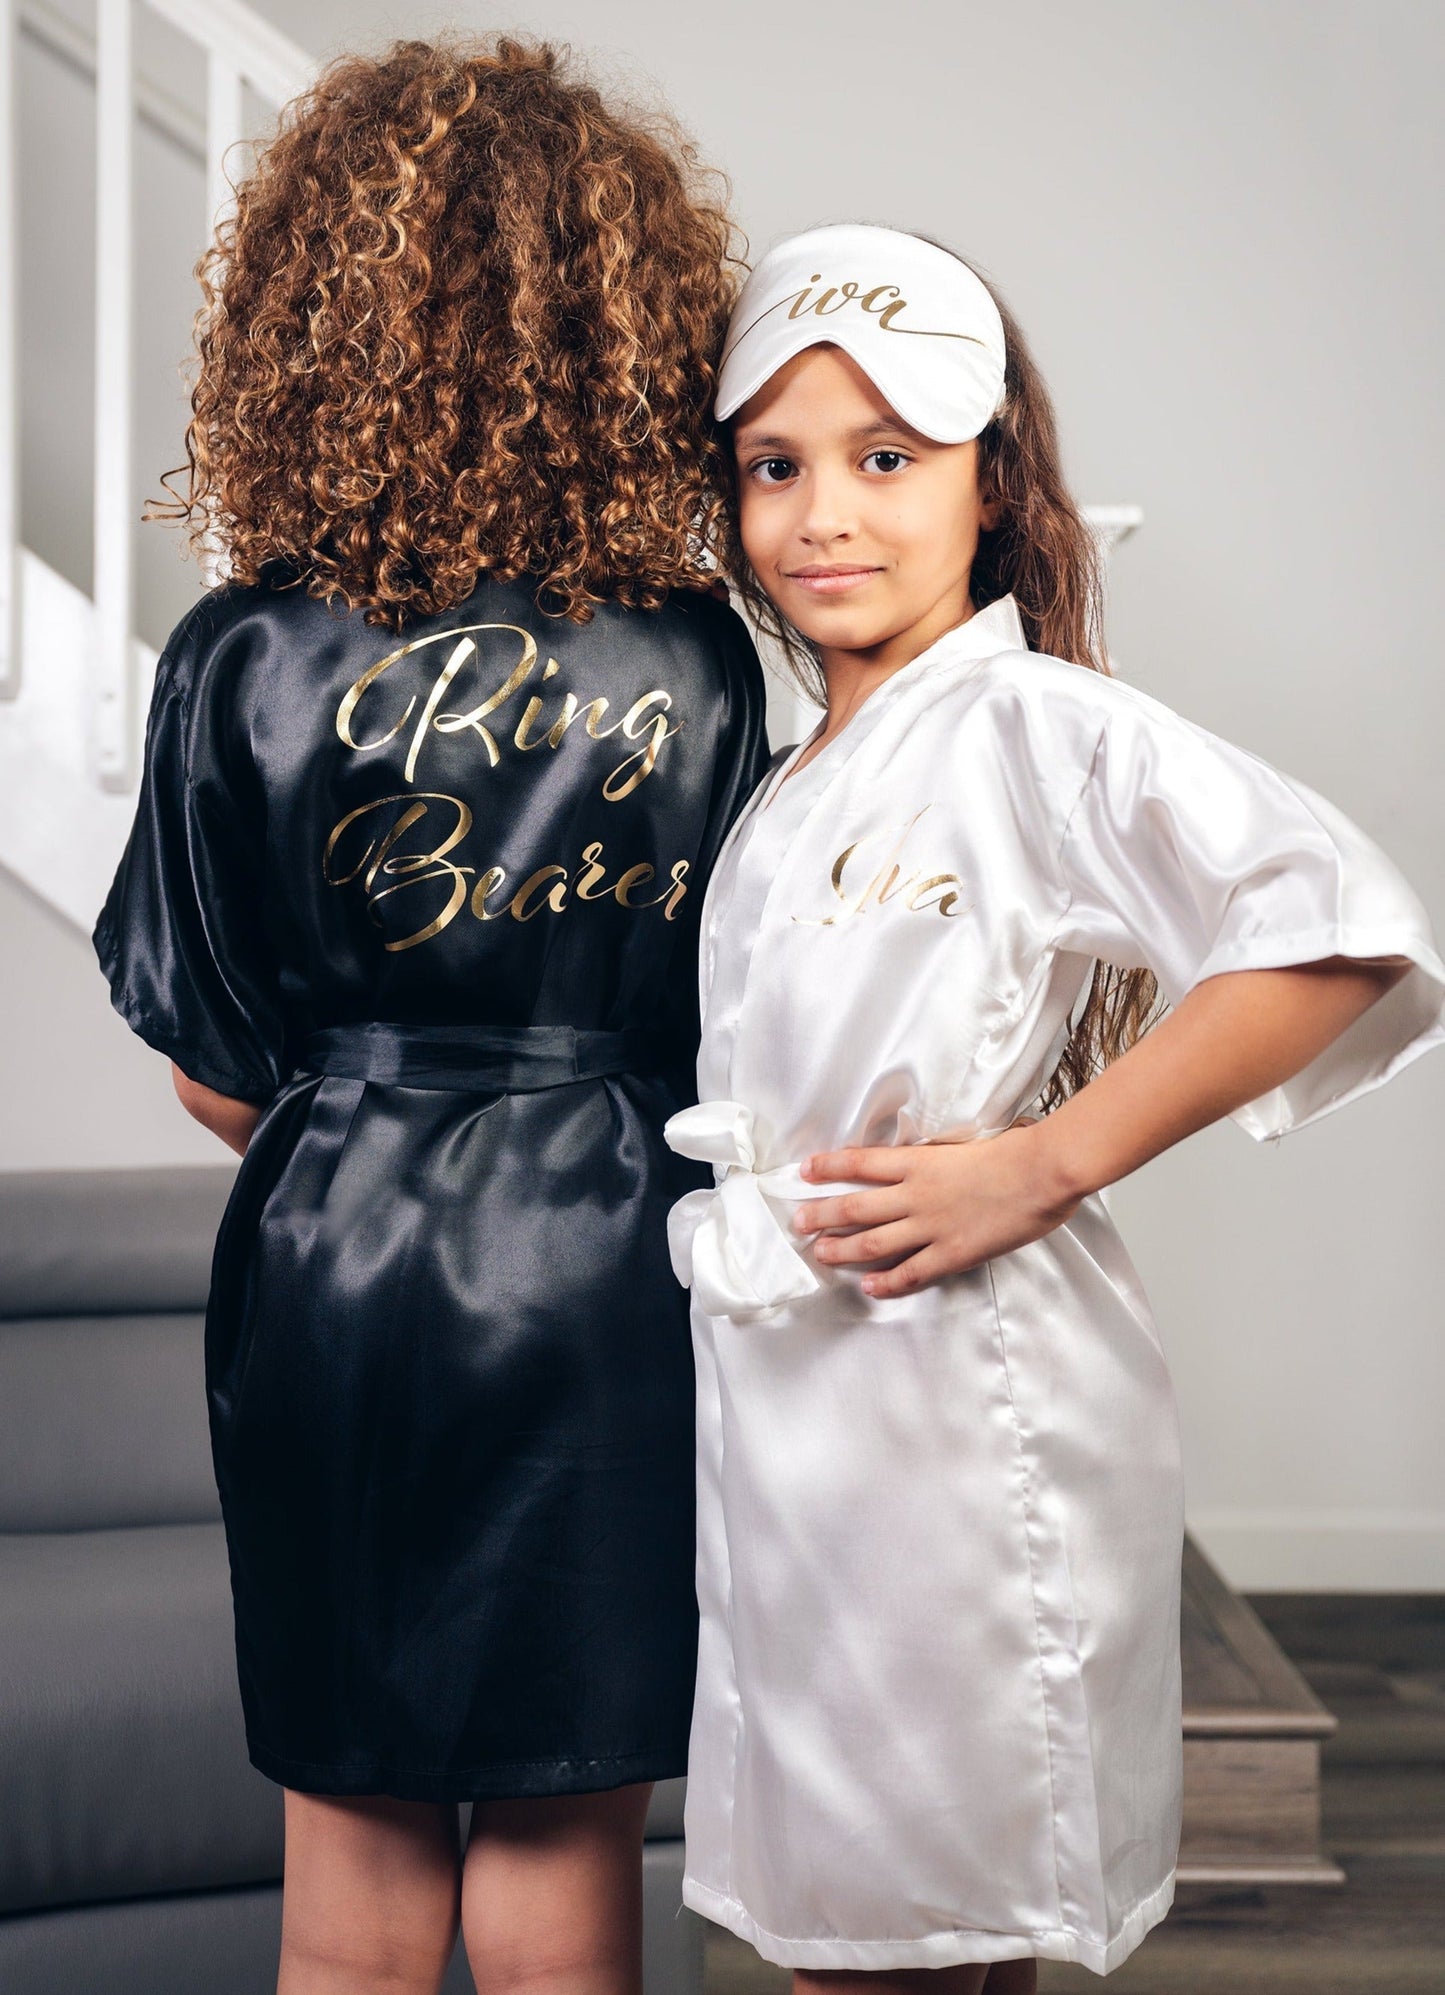 Personalized Birthday Party Satin Robes for Kids - alfresco 